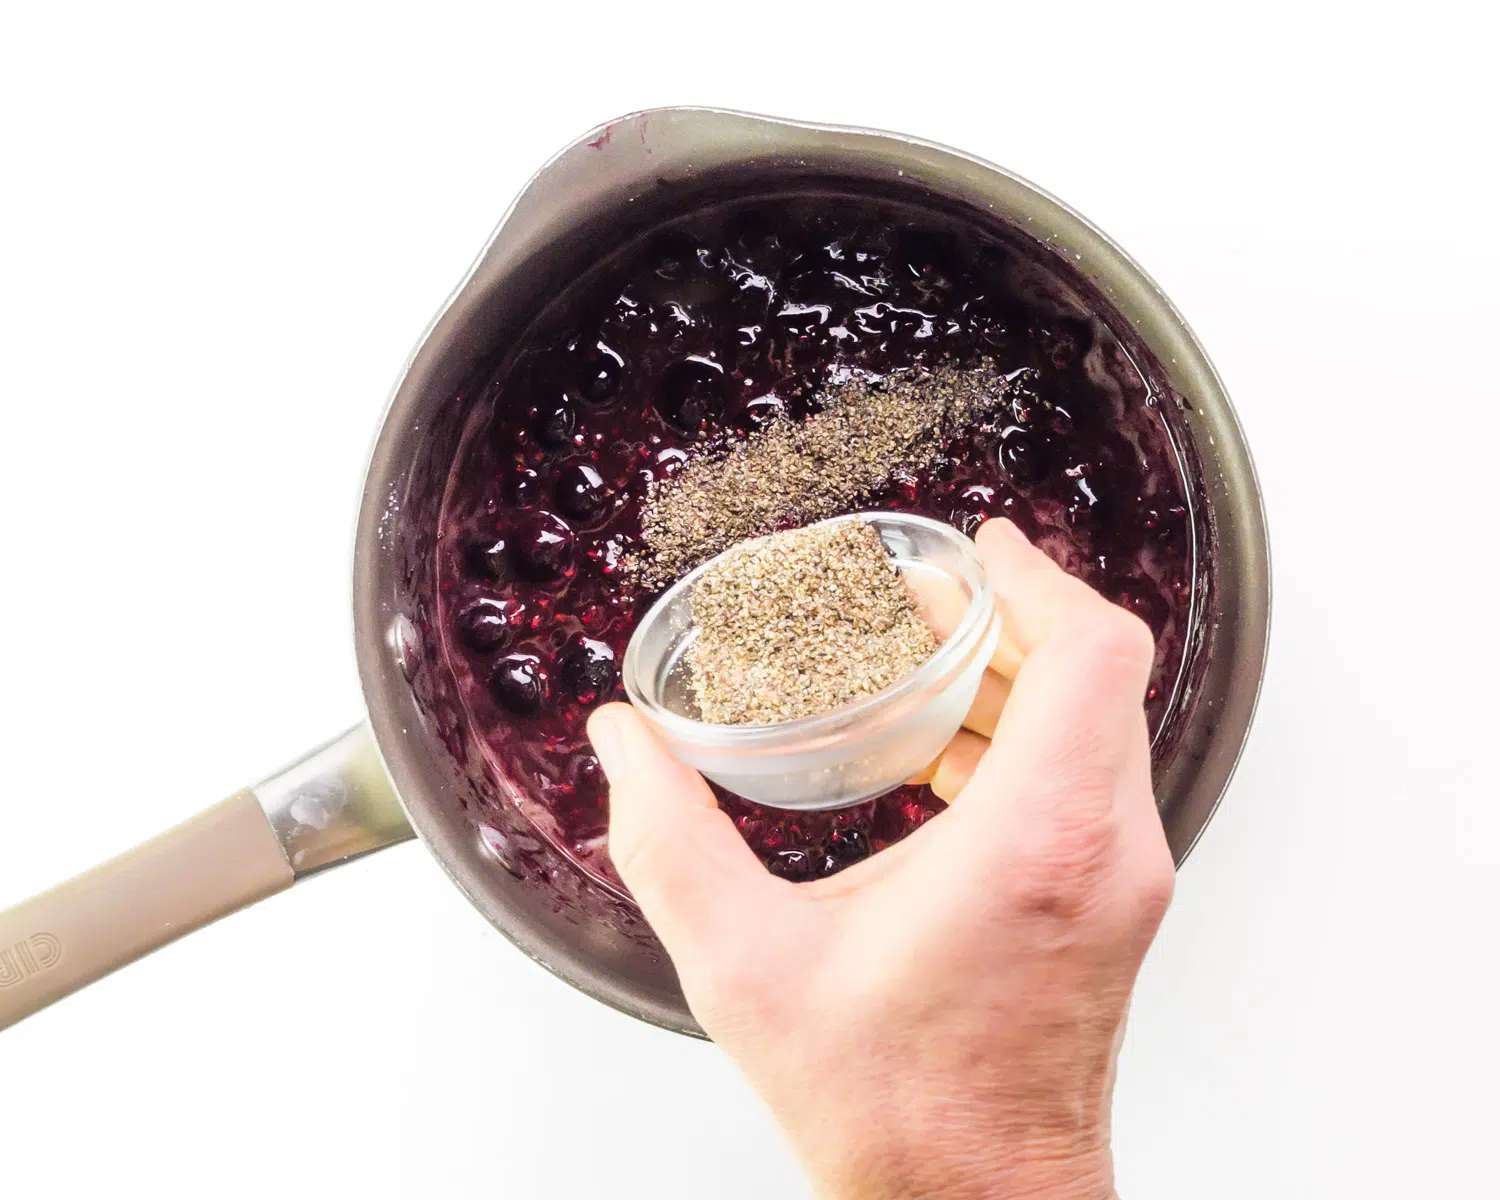 Ground chia seeds are being poured into a saucepan with a berry sauce.